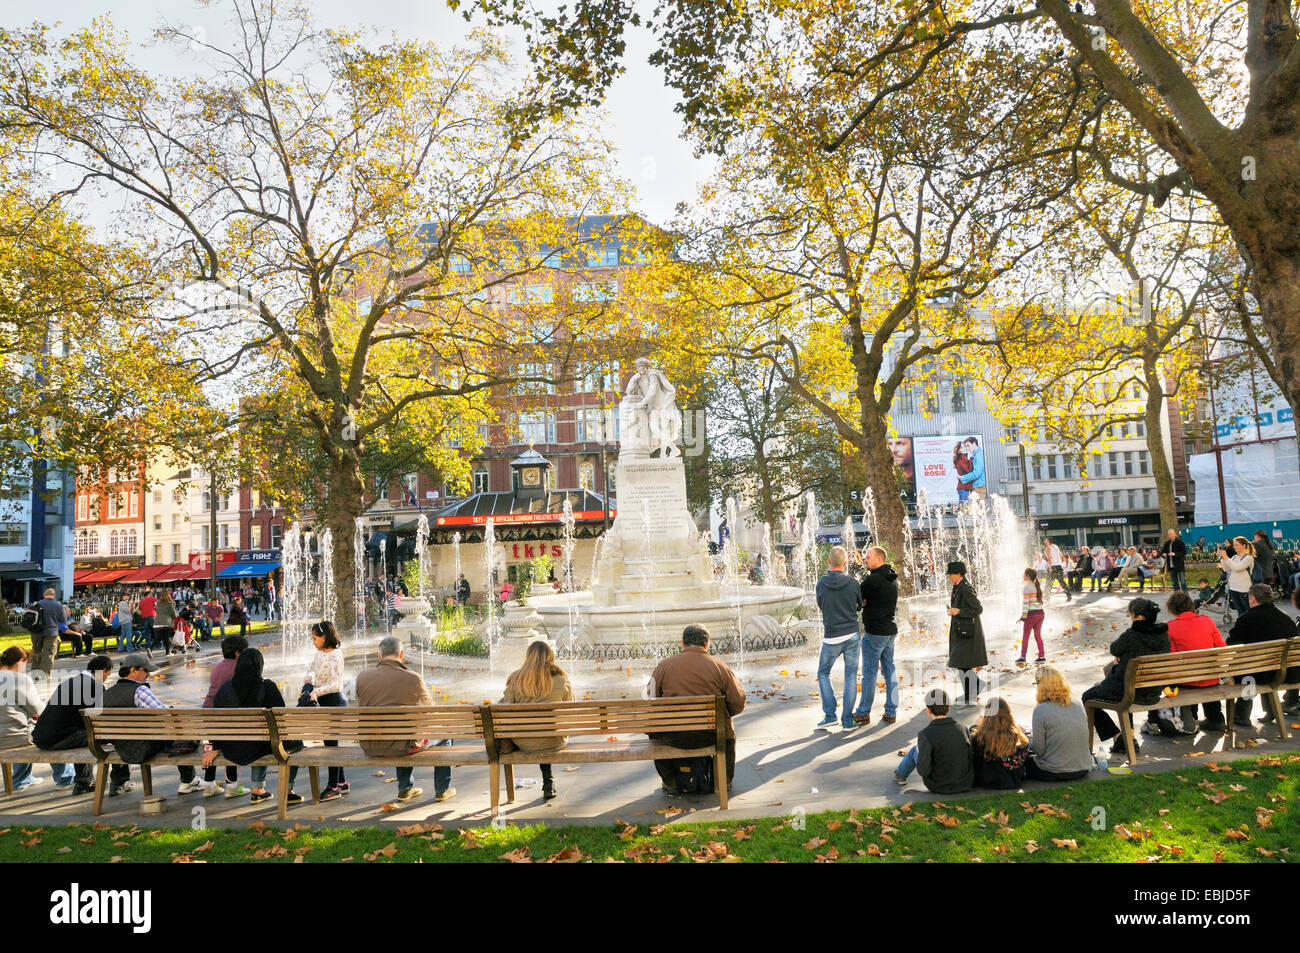 Leicester Square, London.  People relaxing around the William Shakespeare statue and fountain in Leicester Square Gardens. Stock Photo